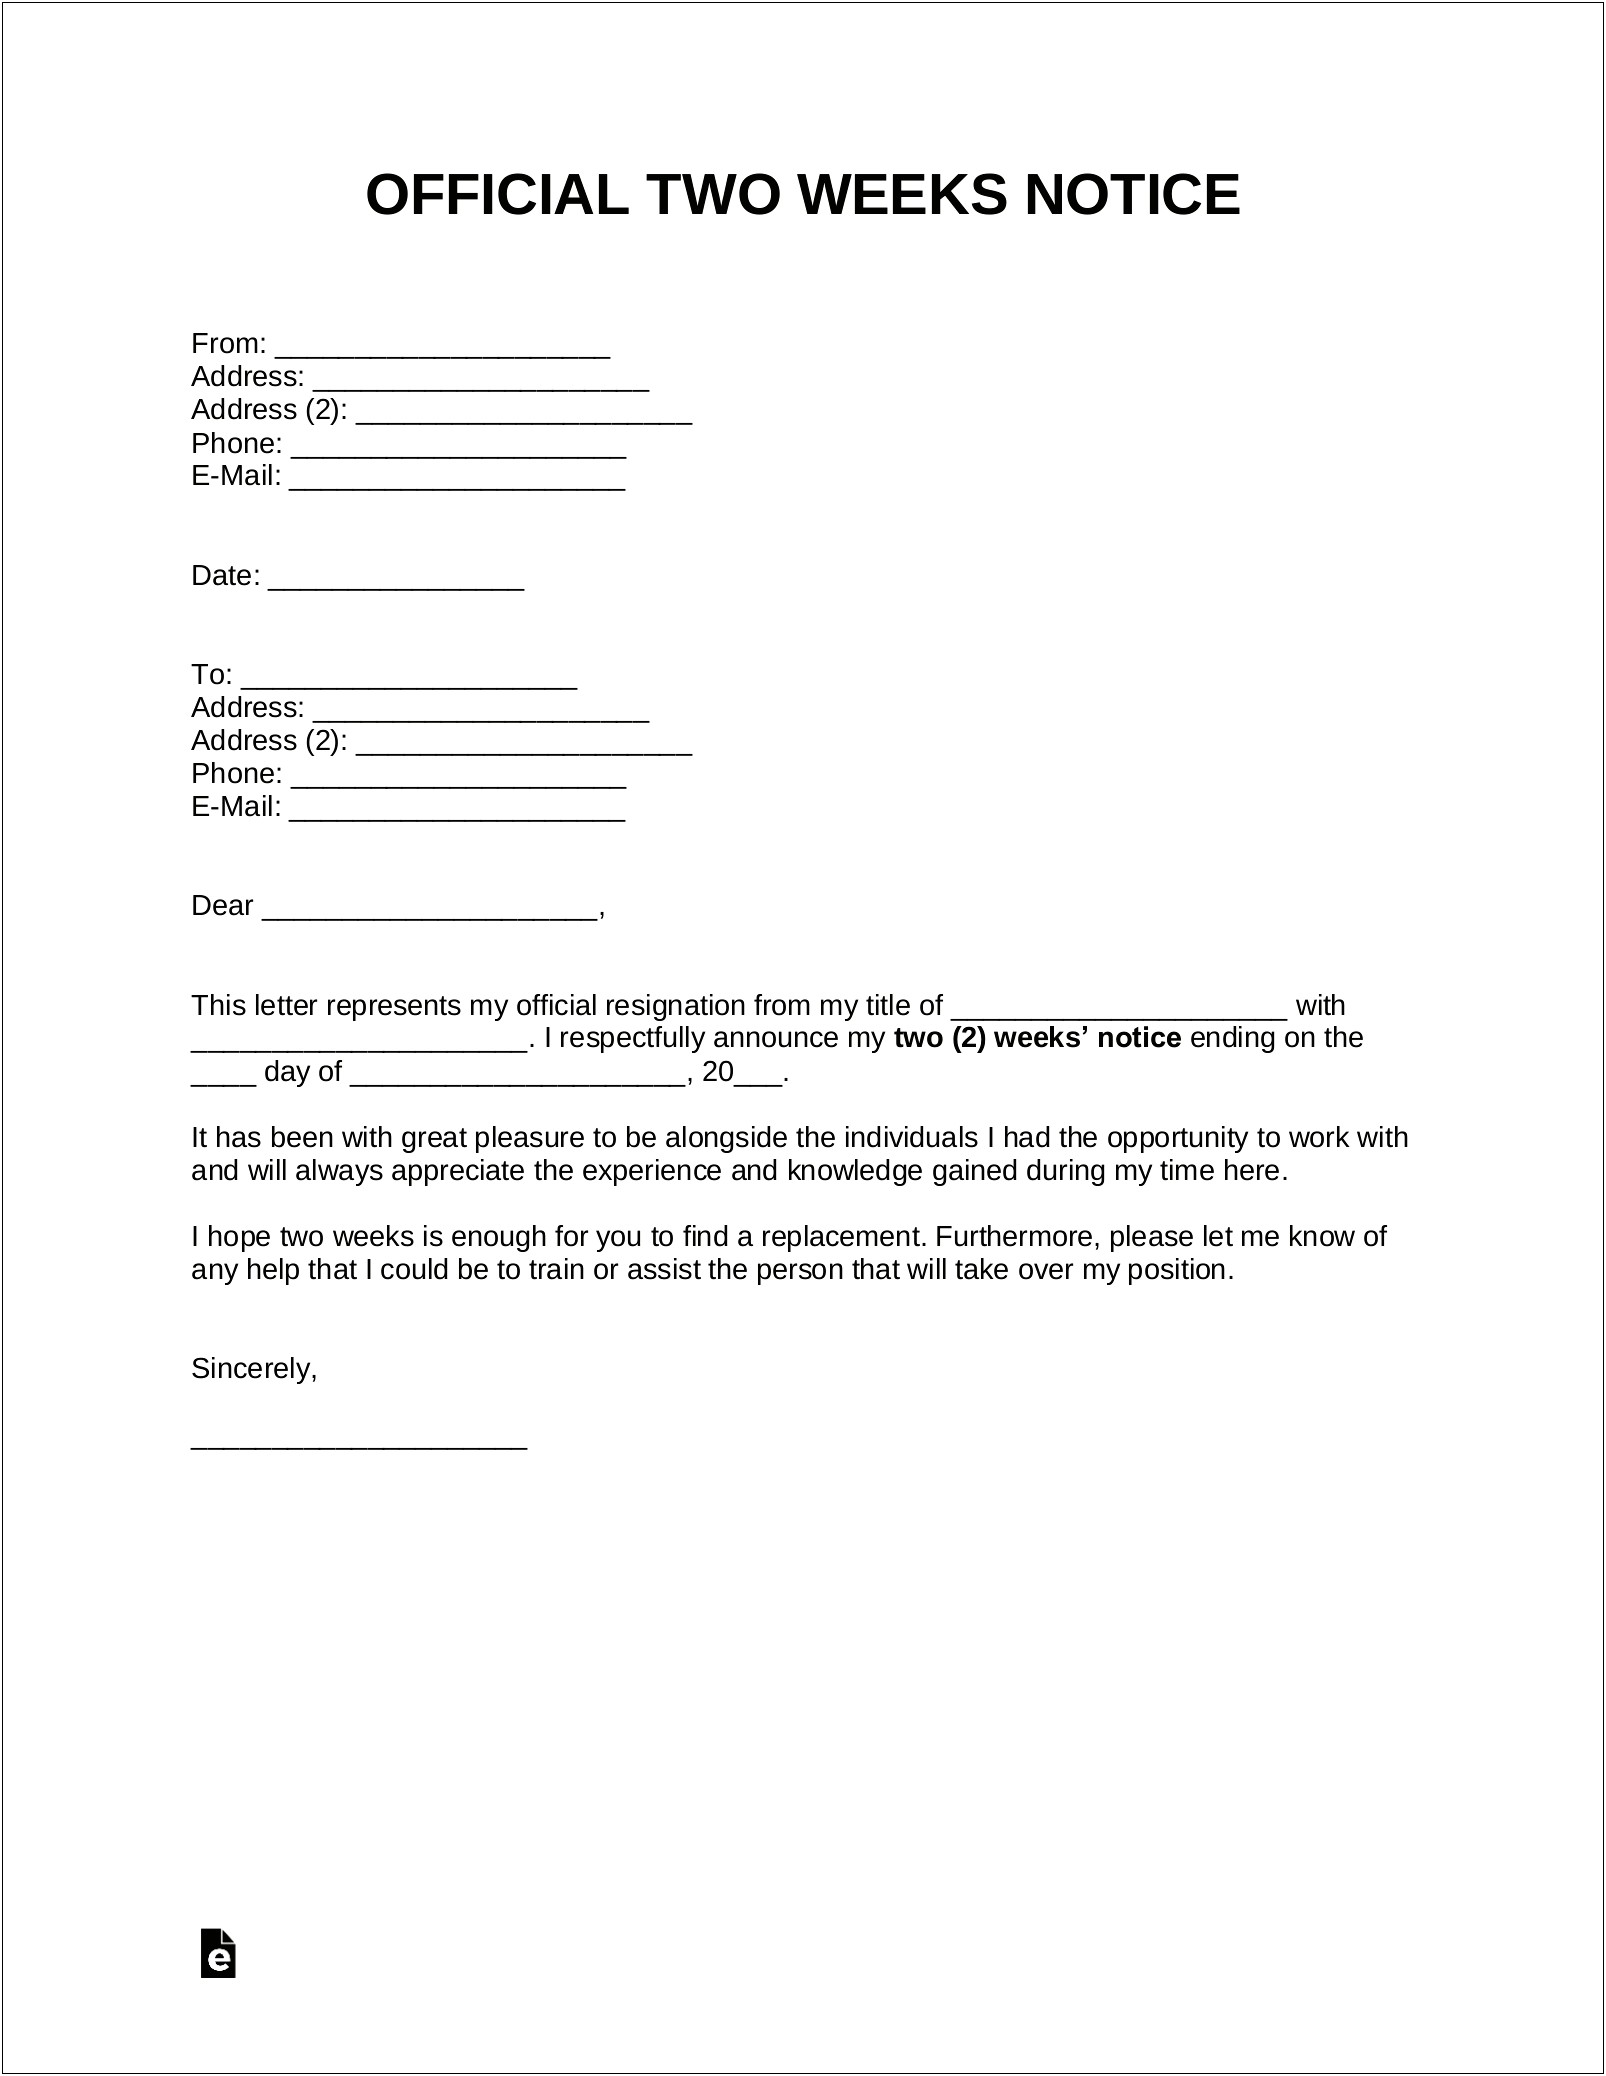 Formal Resignation Letter With 2 Weeks Notice Template